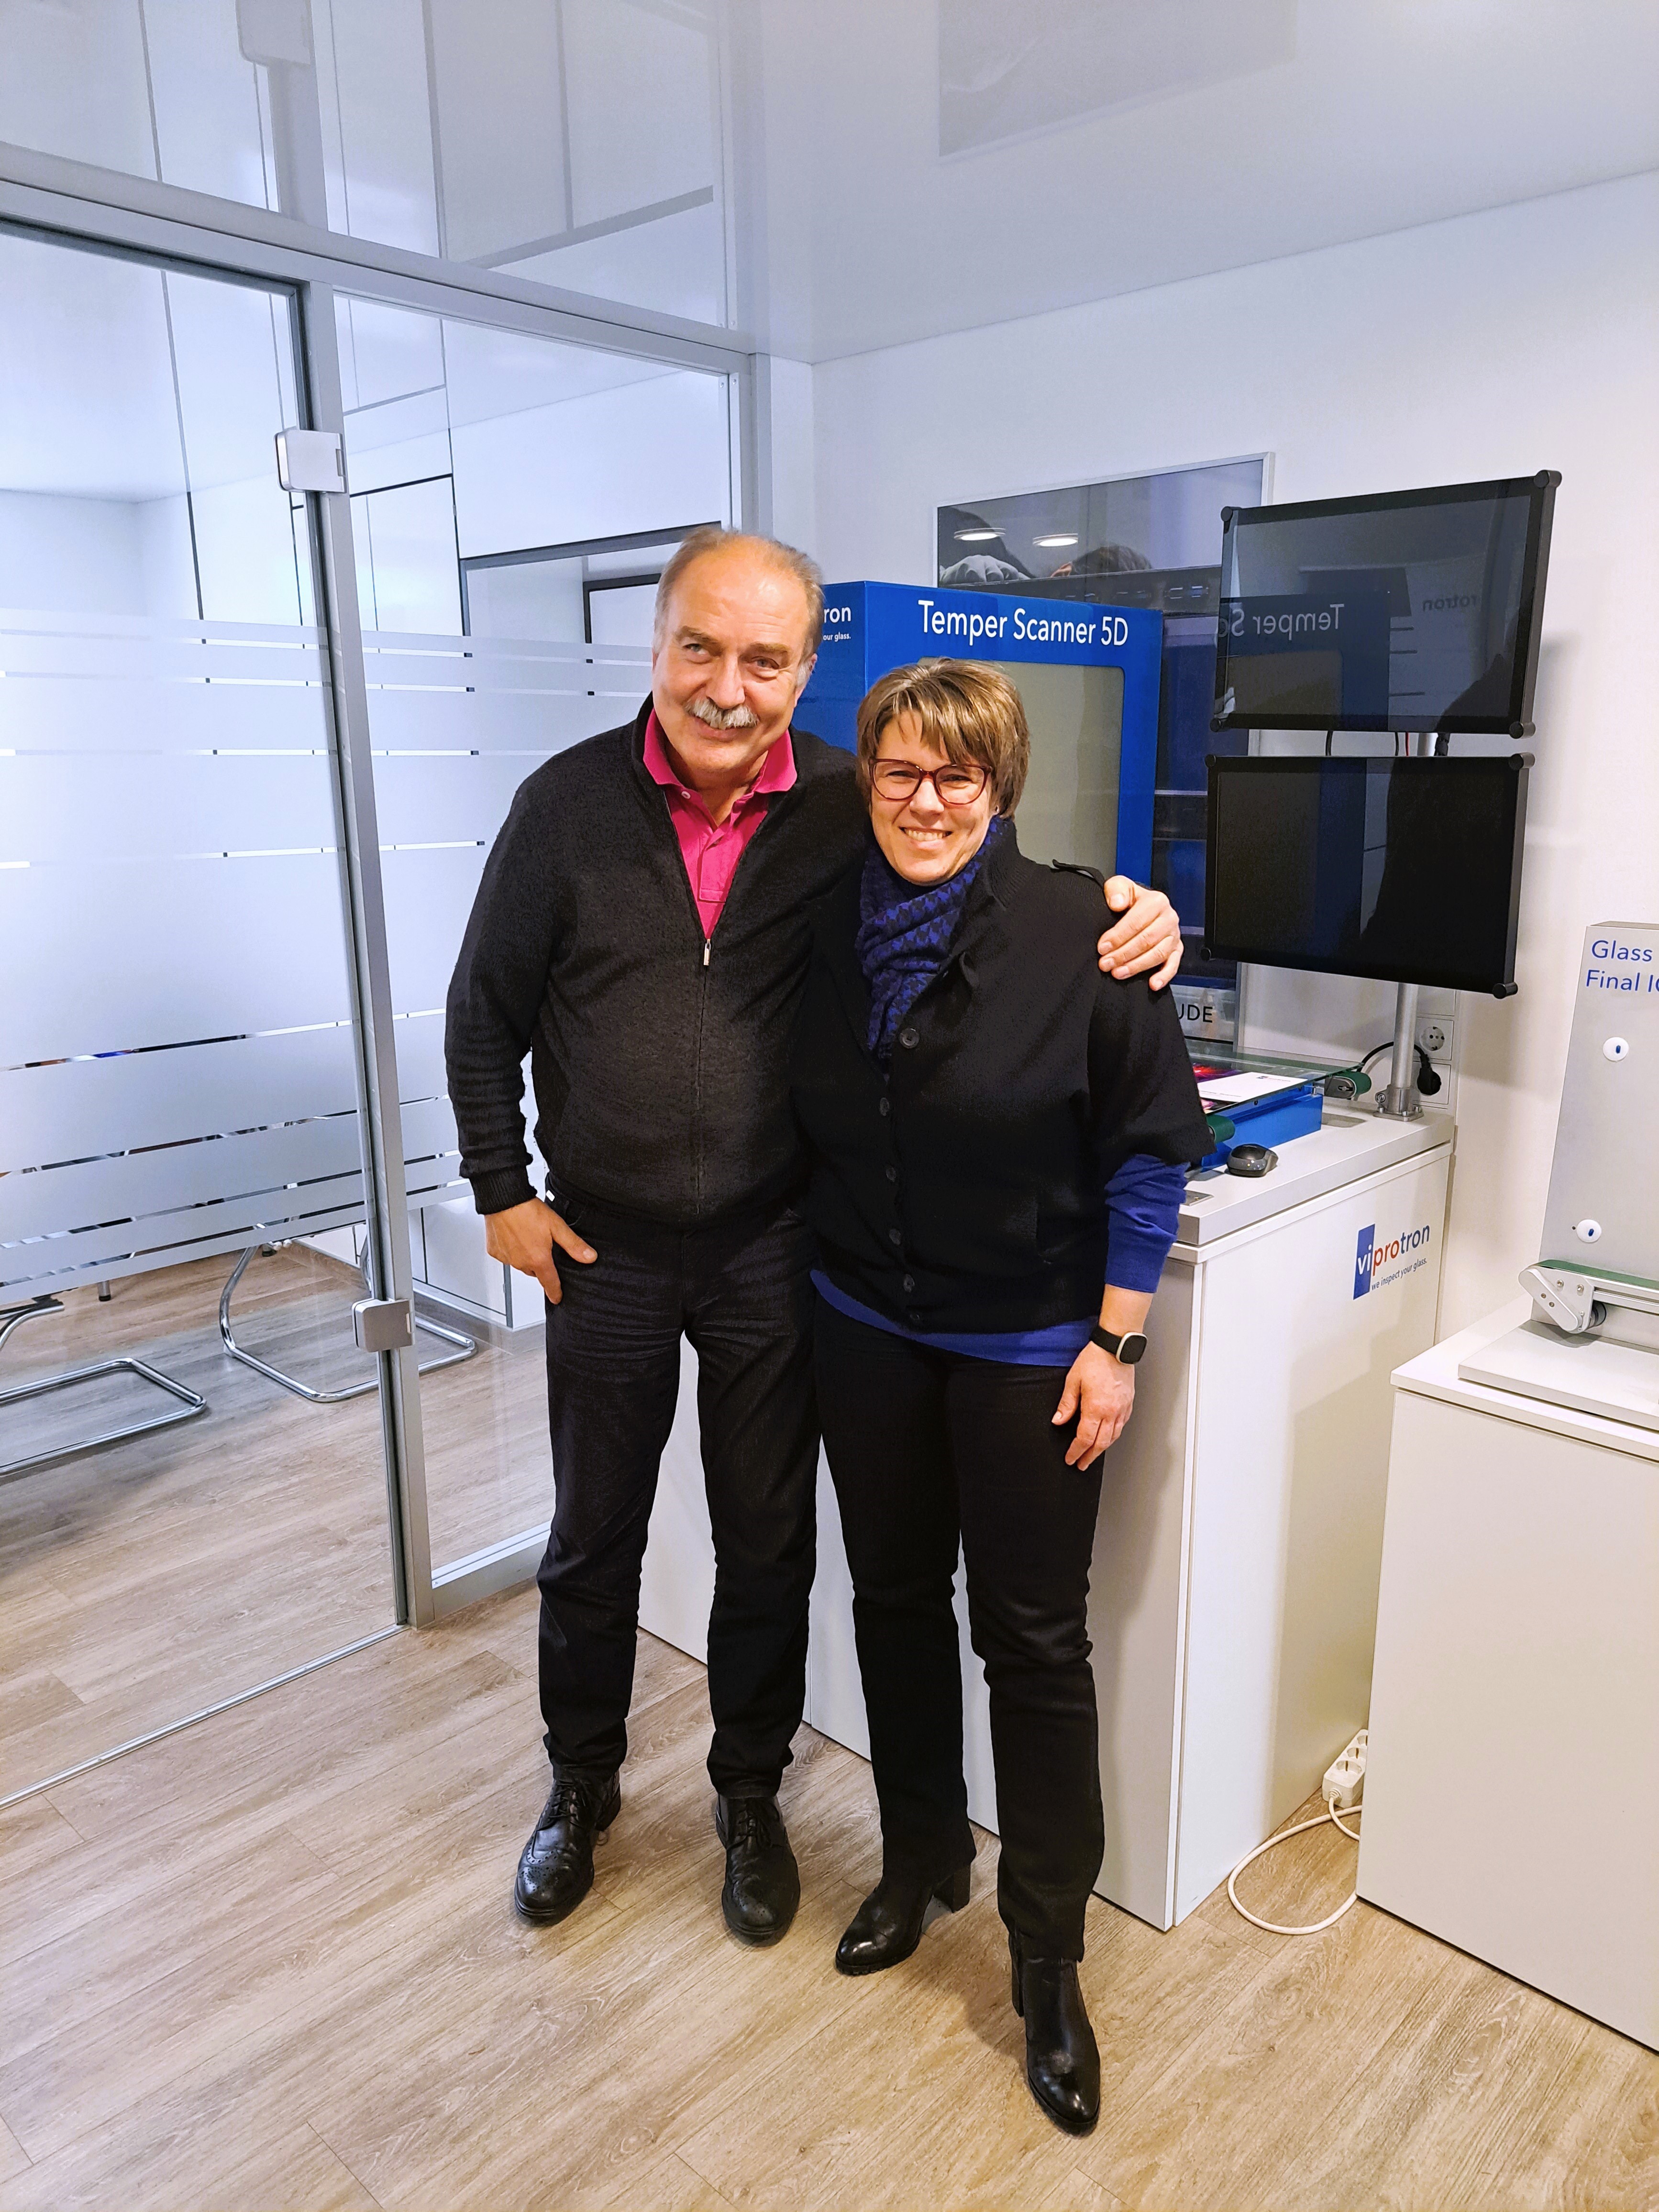 Mr. Rainer Feuster, formerly Vice President Sales, and Mrs. Sandra Kugler, Sales and Marketing Director, at Viprotron Headquarters